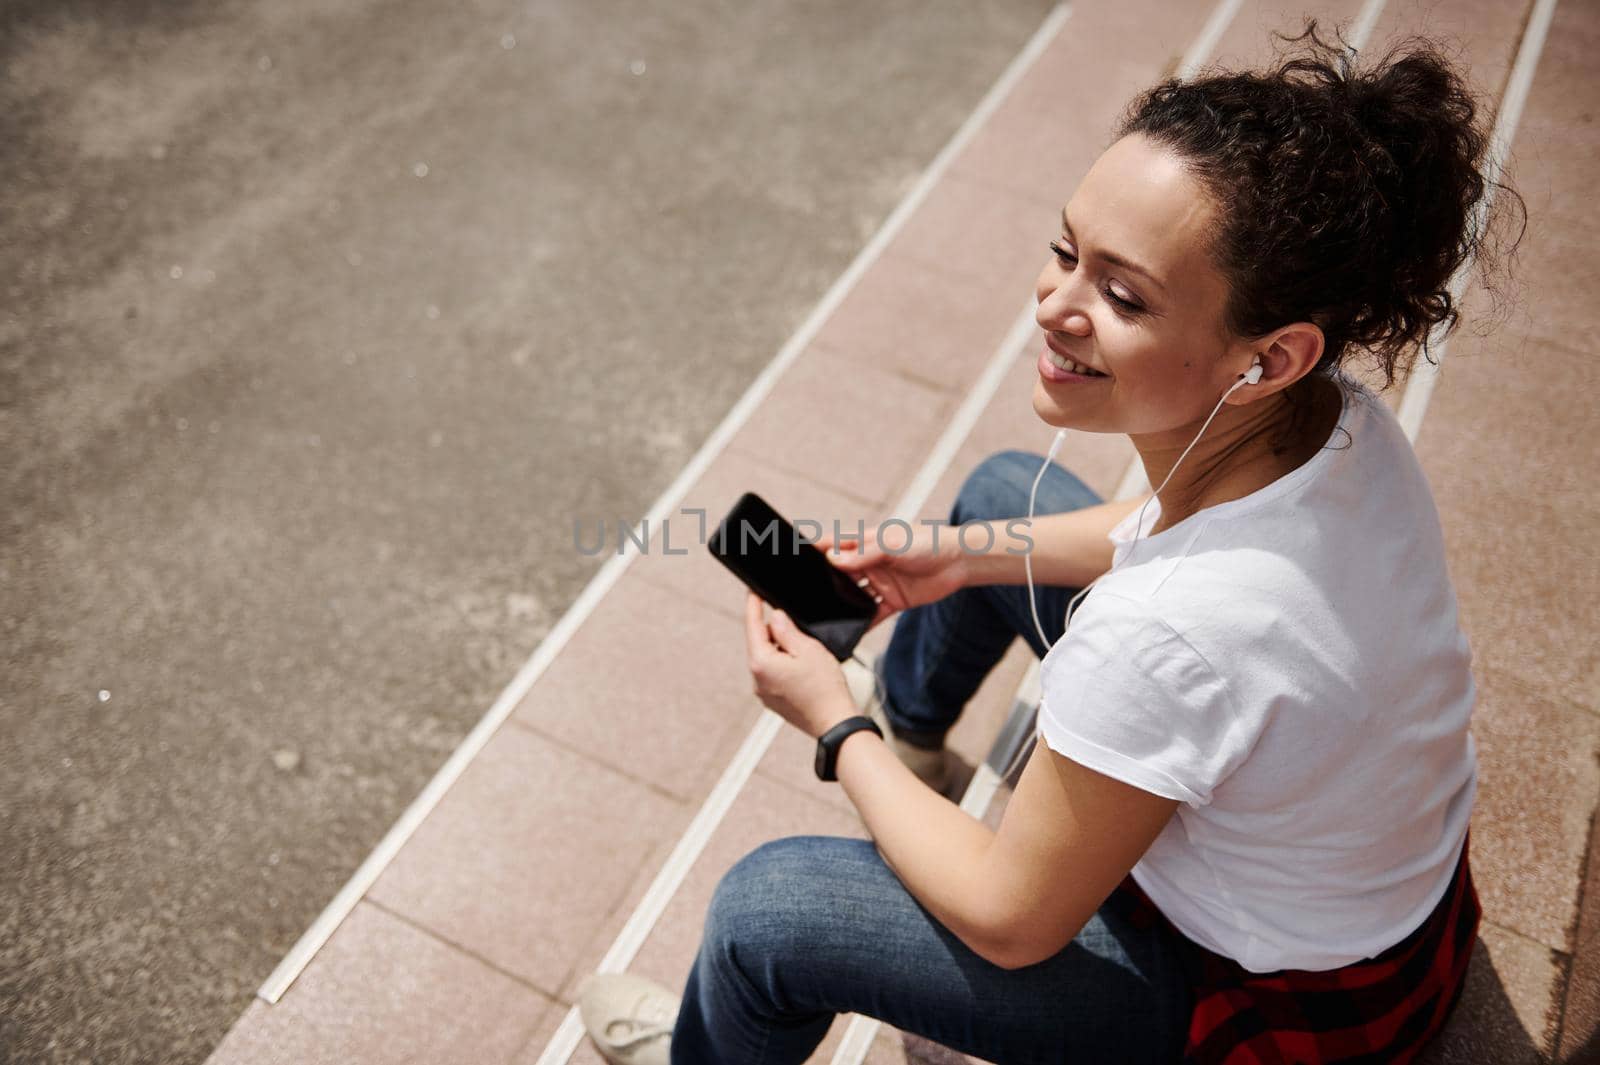 Smiling woman with headphones holding a mobile phone and looking away while sitting on steps by artgf